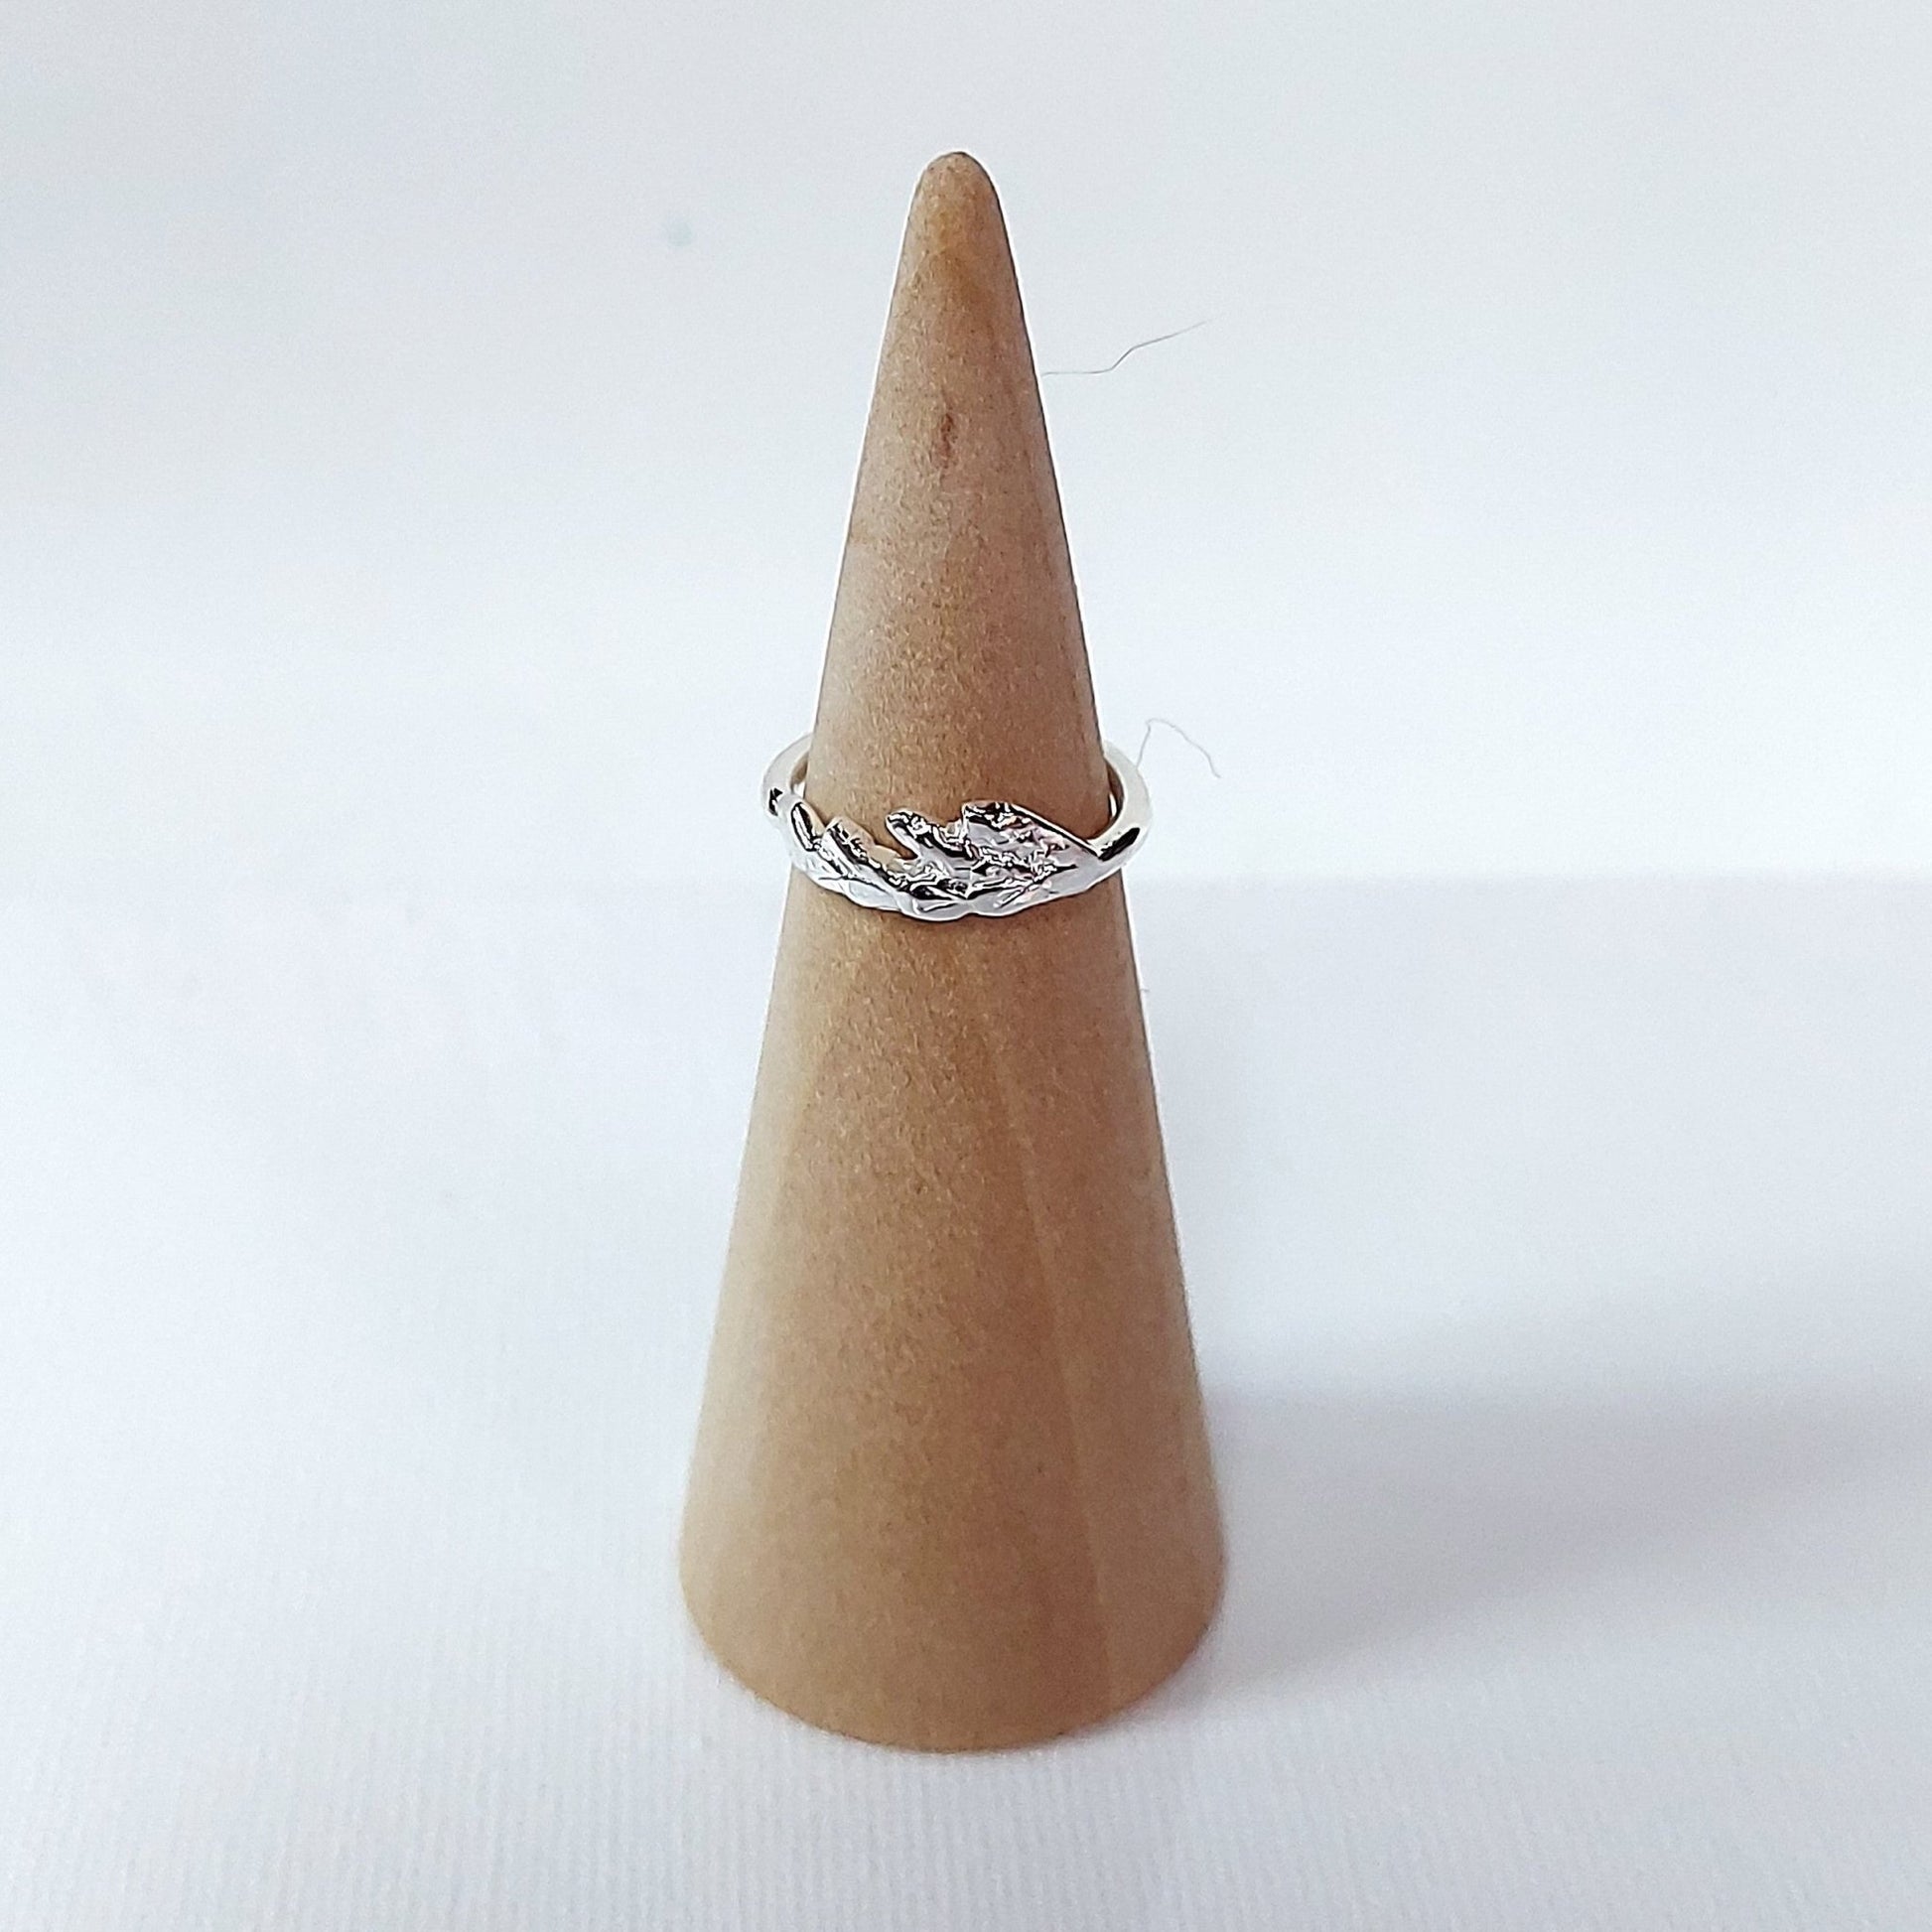 sterling silver size 5 Delicate and elegant sterling silver ring with natural cedar leaf motif.